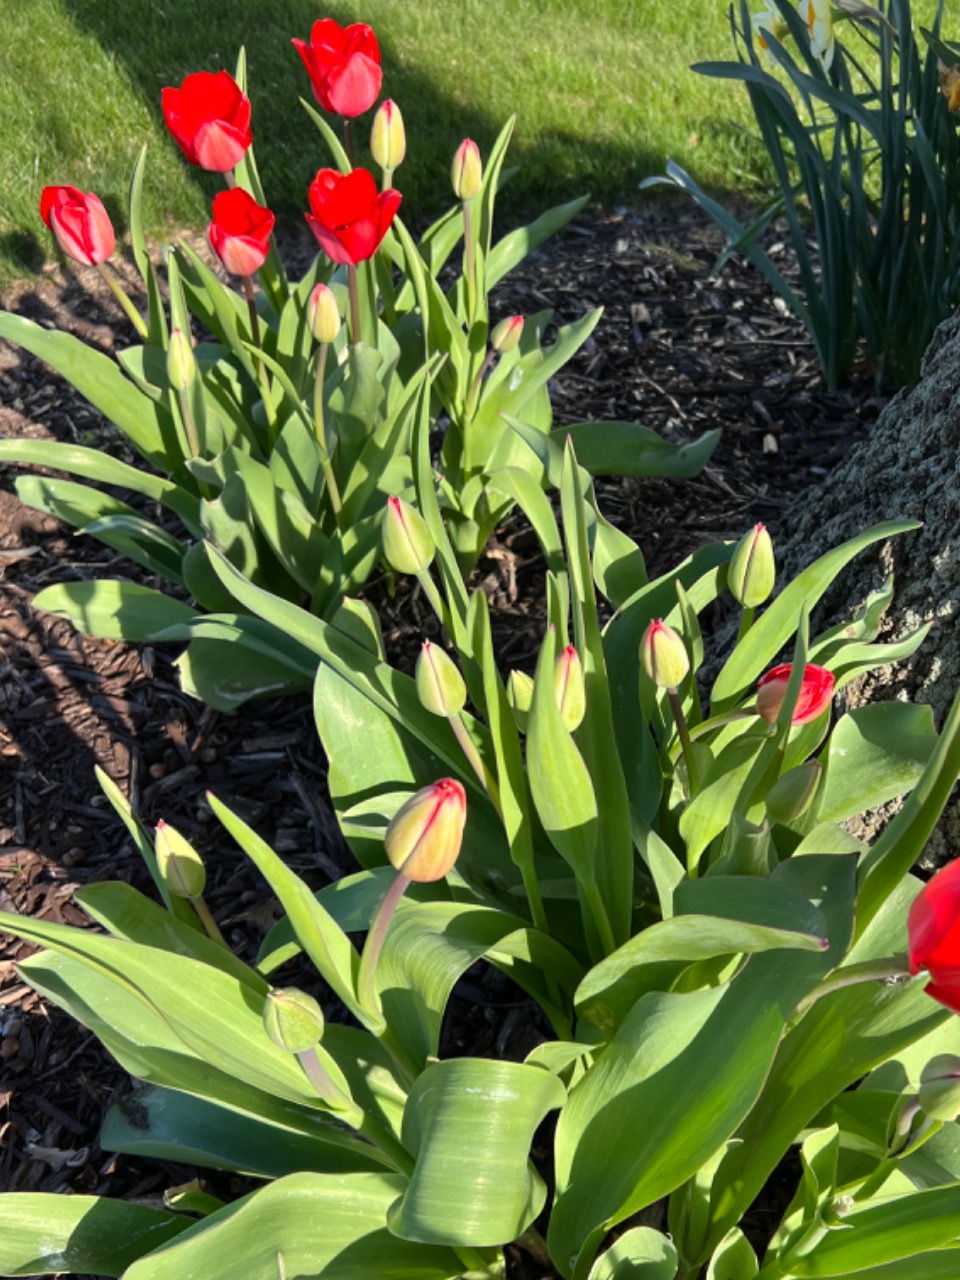 Red tulips blooming